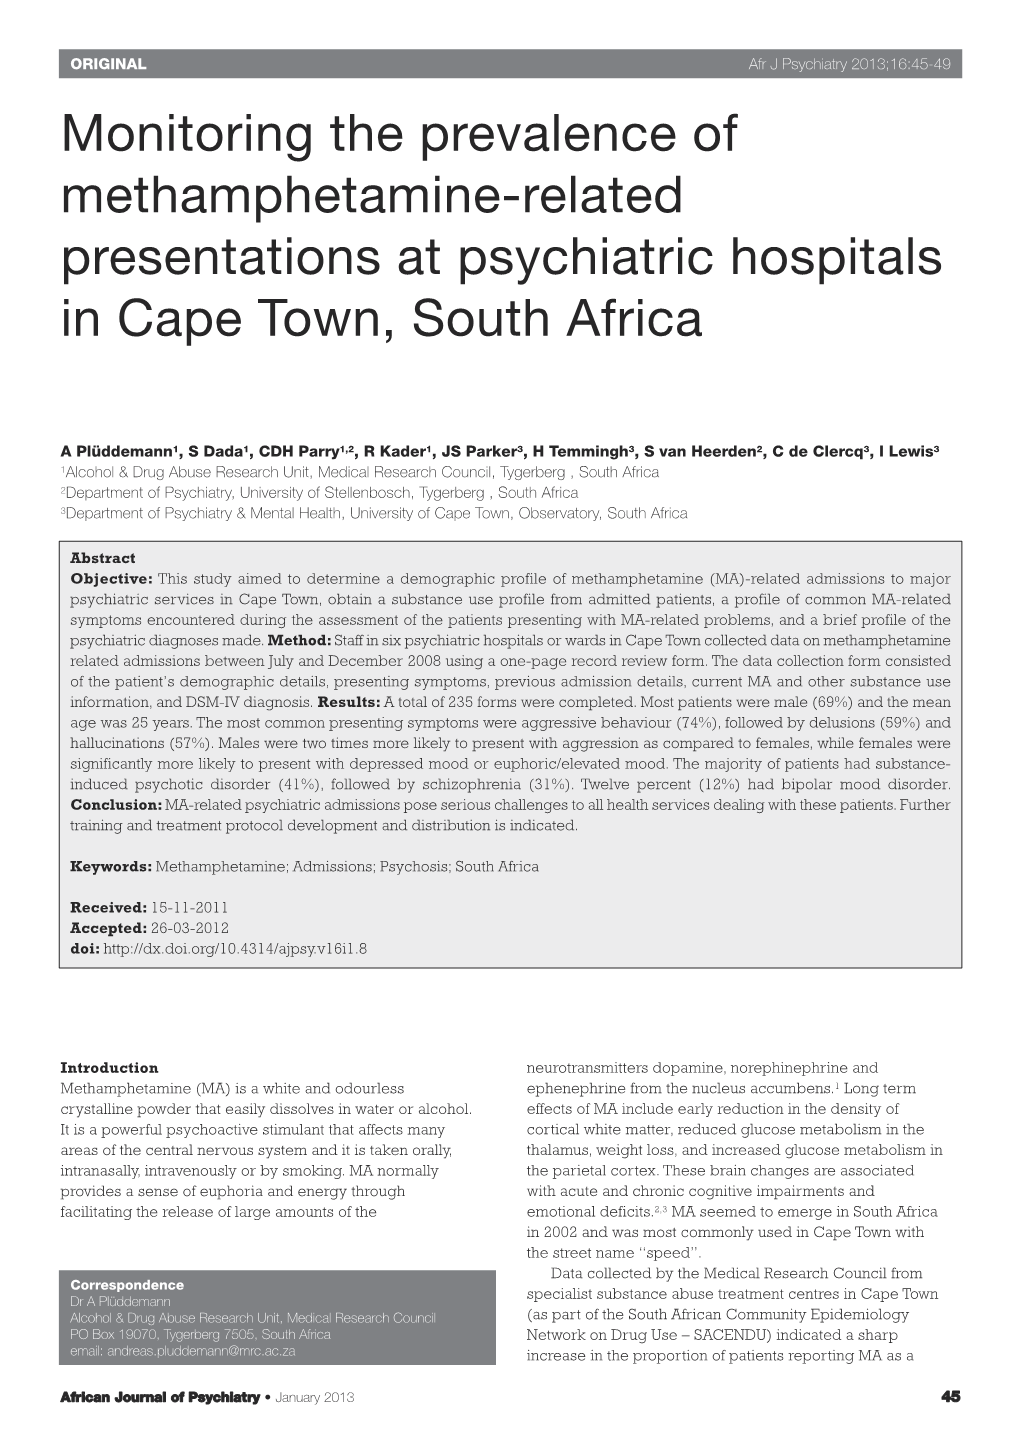 Monitoring the Prevalence of Methamphetamine-Related Presentations at Psychiatric Hospitals in Cape Town, South Africa